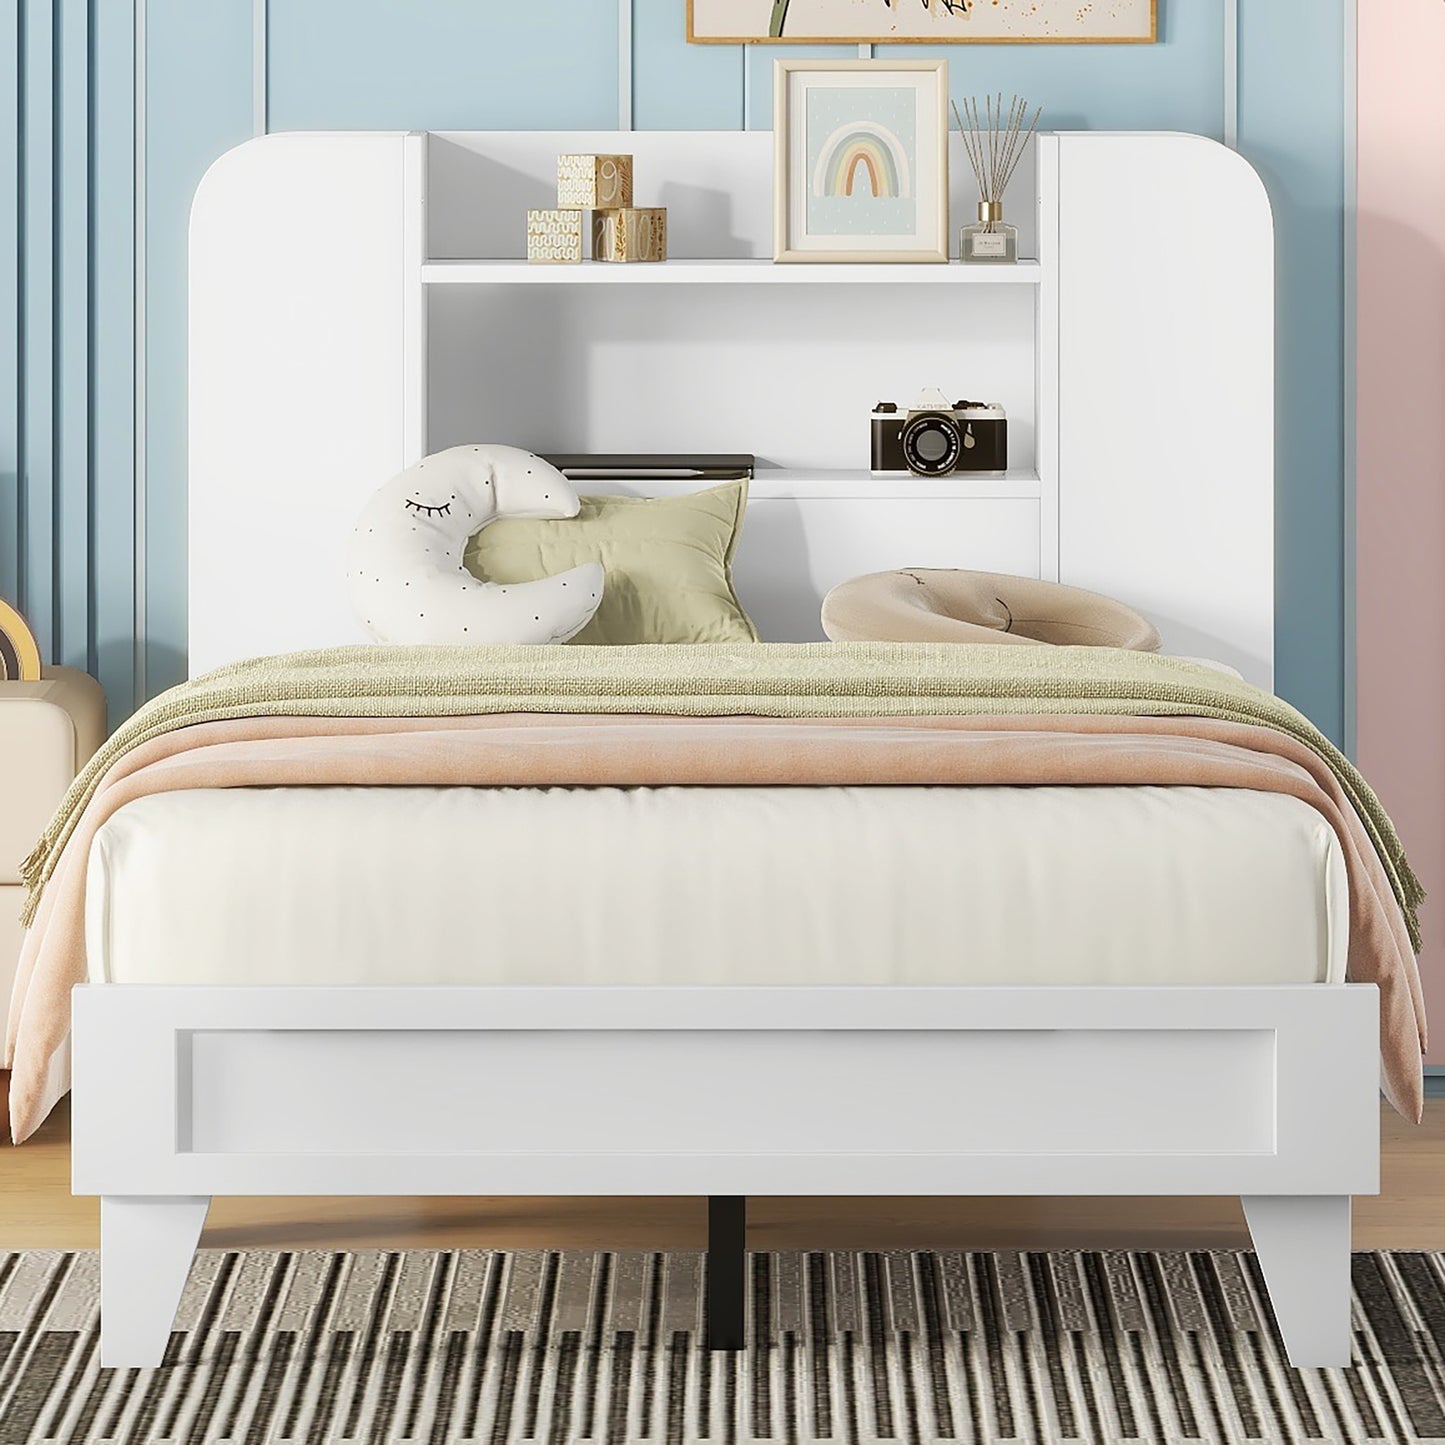 Twin Size Platform Bed with Storage Headboard,Multiple Storage Shelves on Both Sides,White